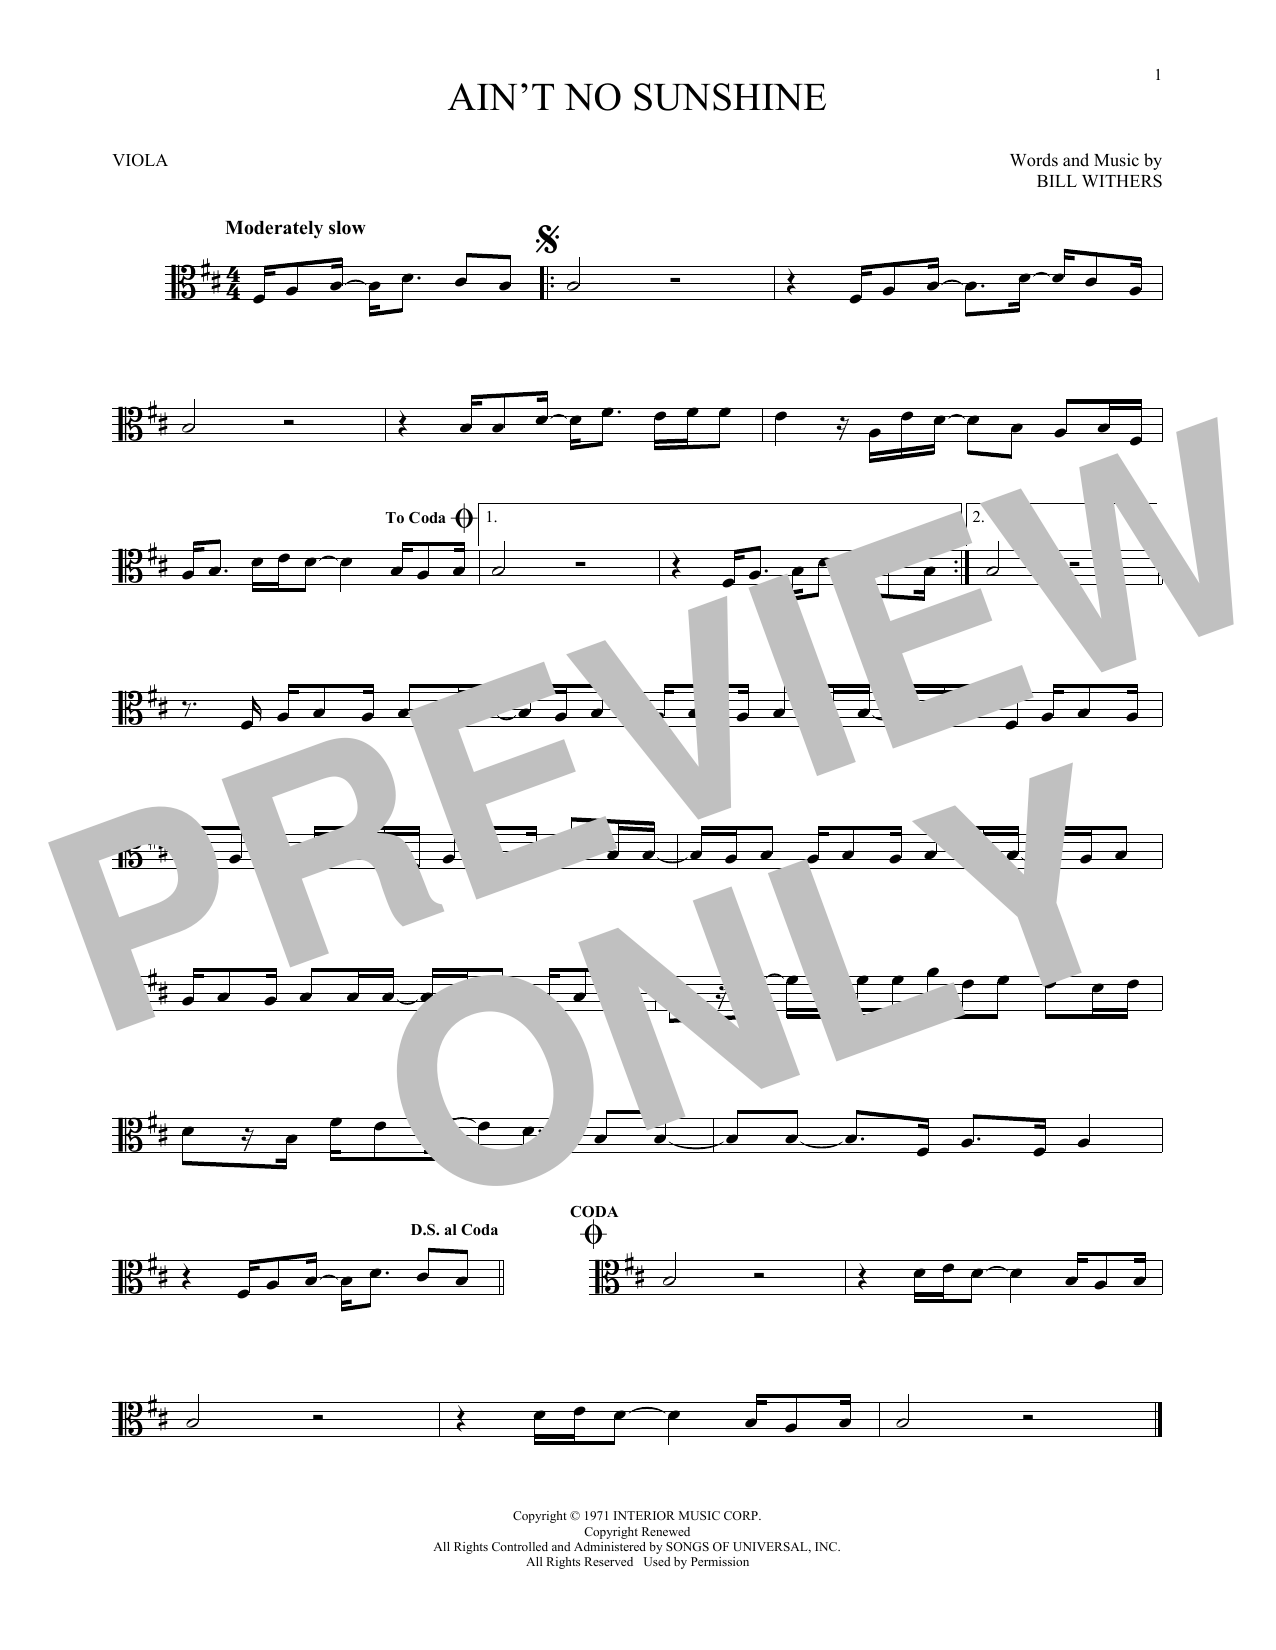 Download Bill Withers Ain't No Sunshine Sheet Music